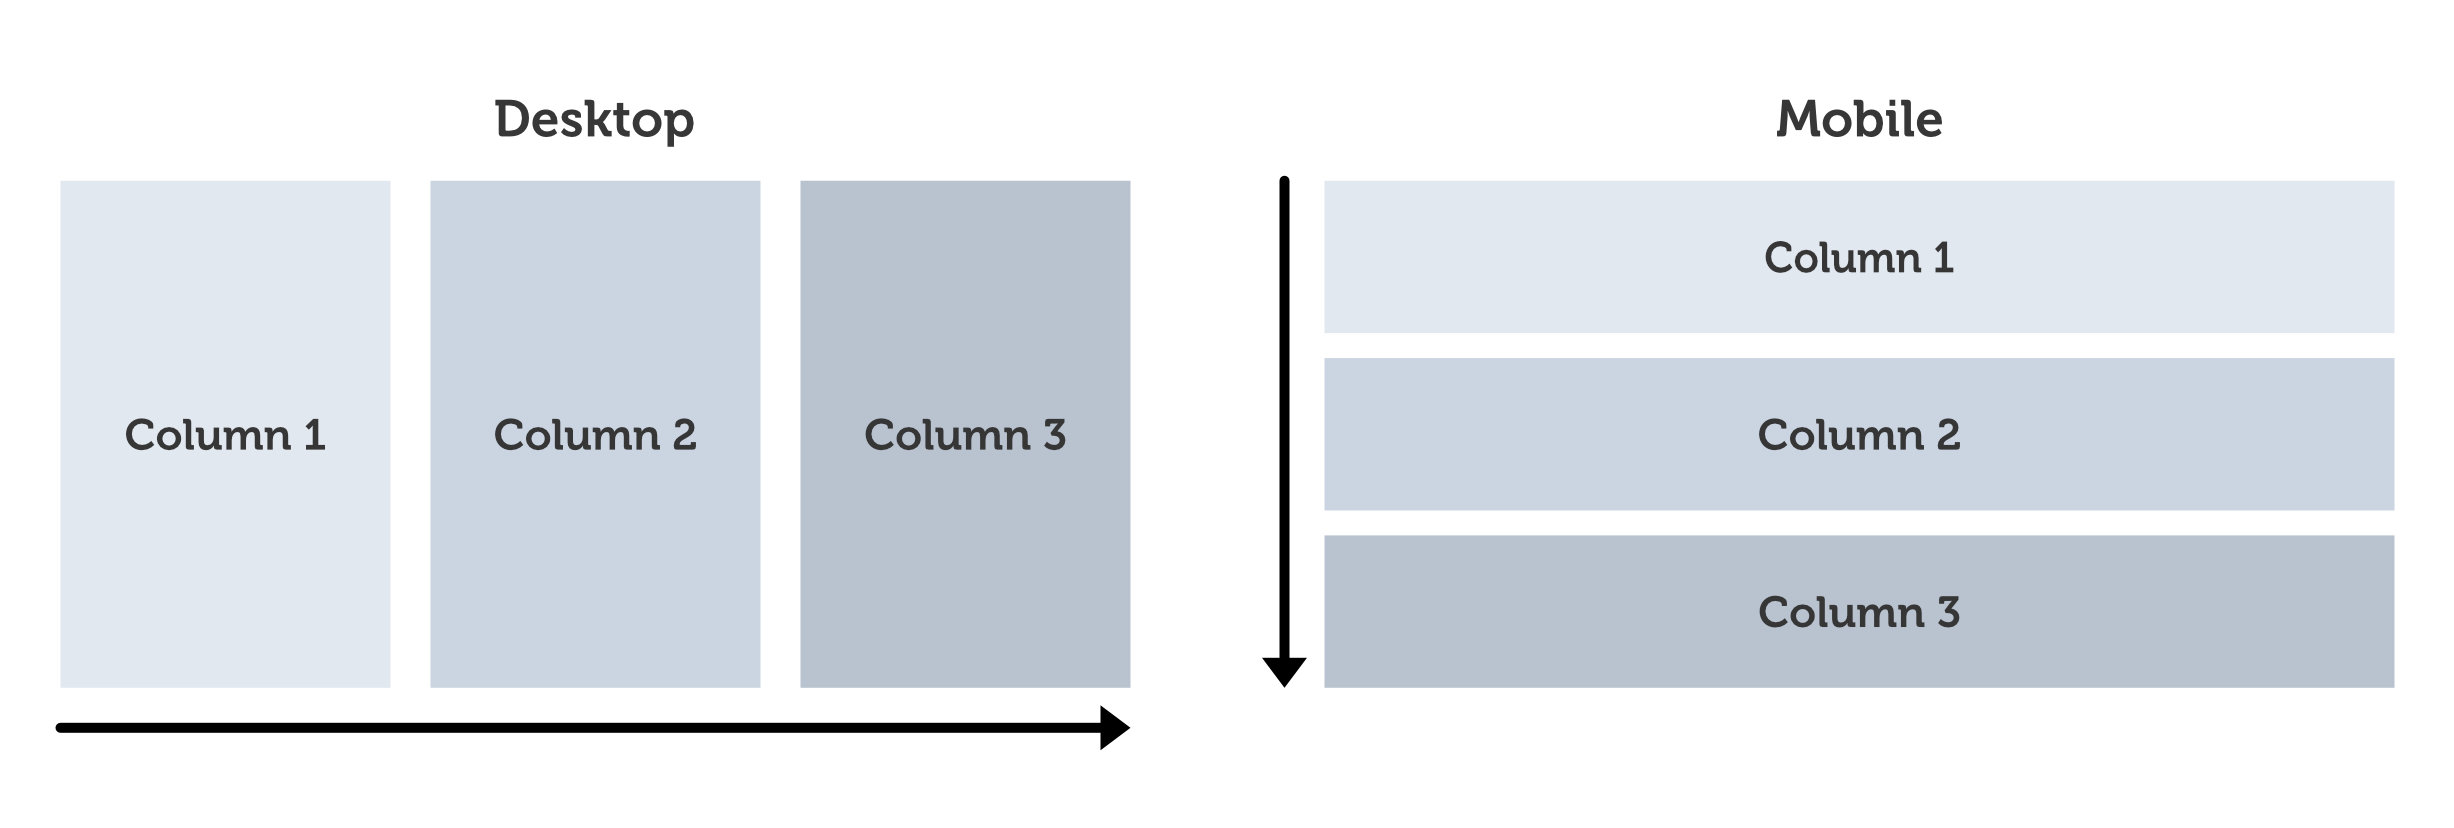 Column Stacking comparison between desktop and mobile layouts 